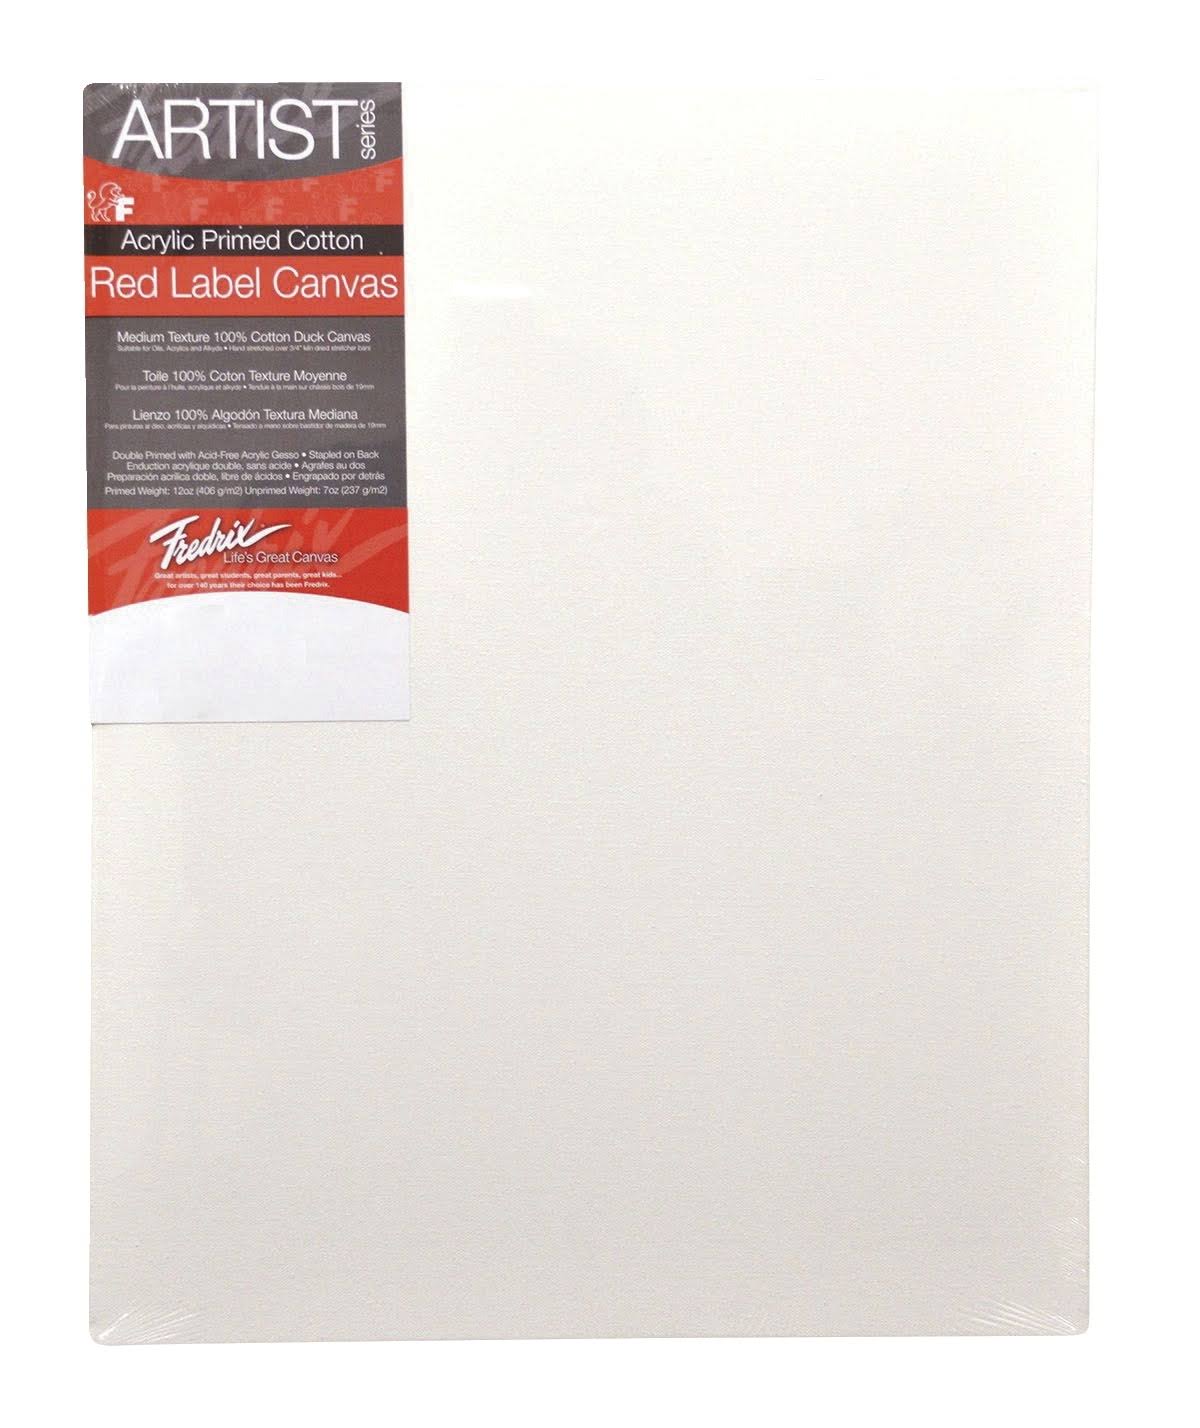 Fredrix Red Label Stretched Canvas - White, 9"x12"